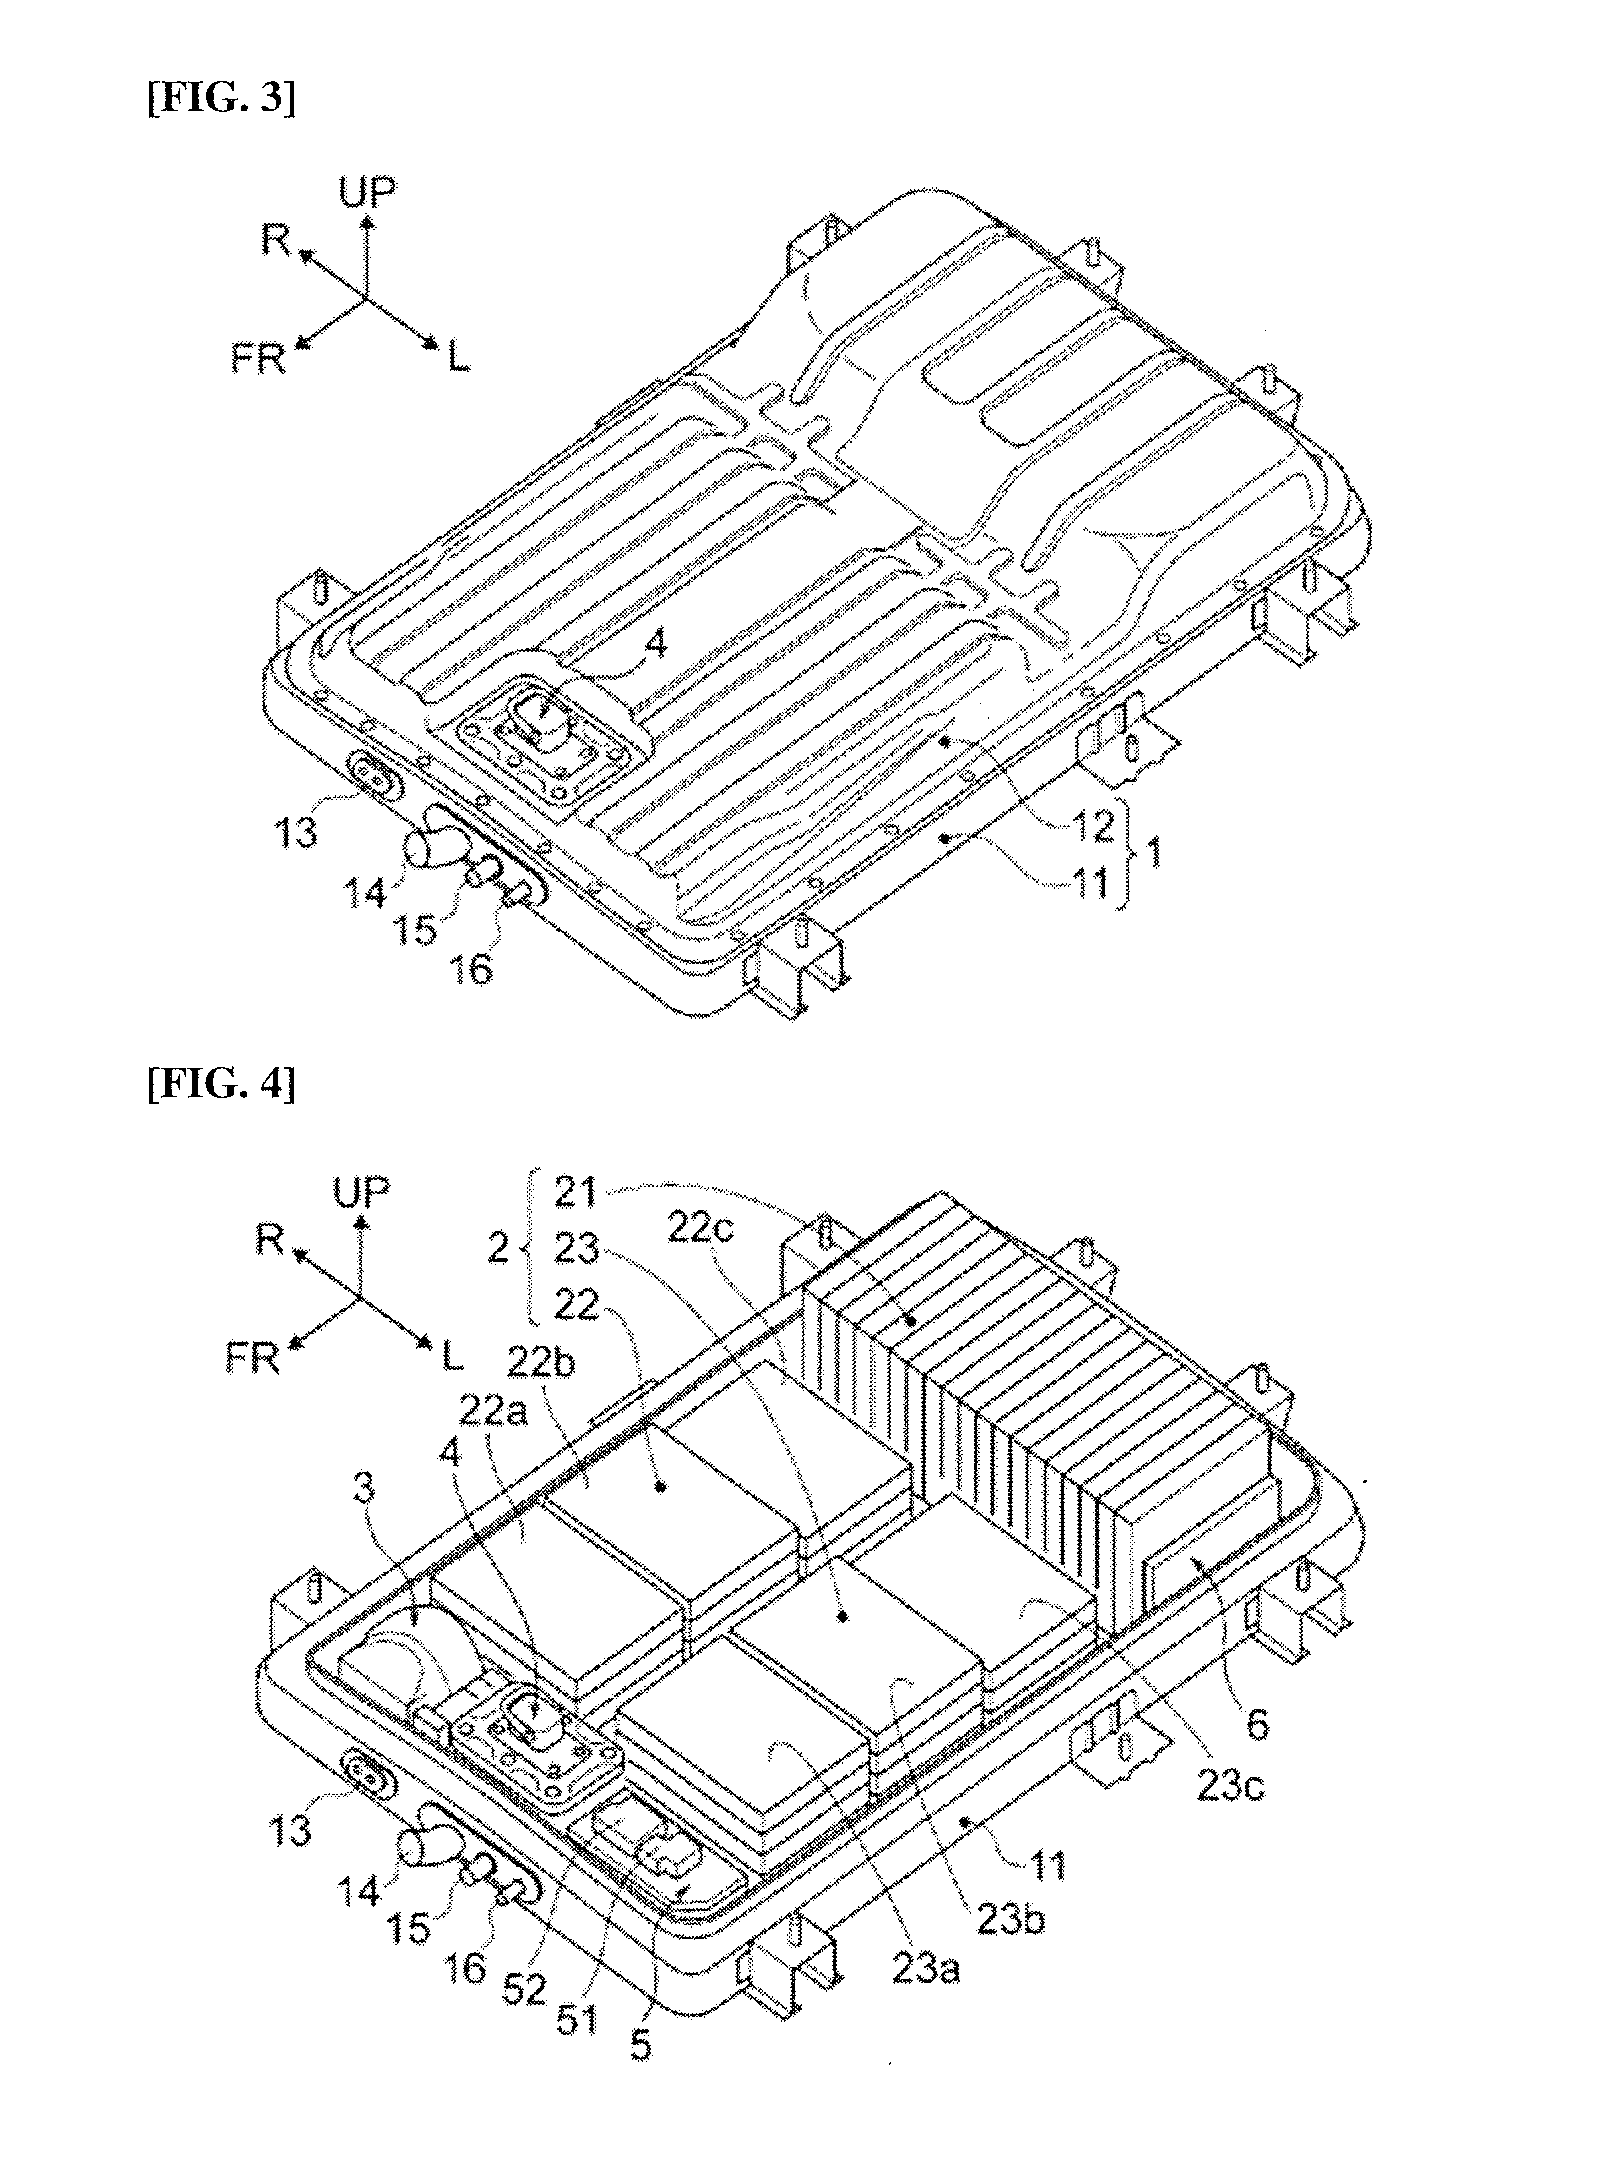 High-voltage harness connection structure for electrically driven vehicle